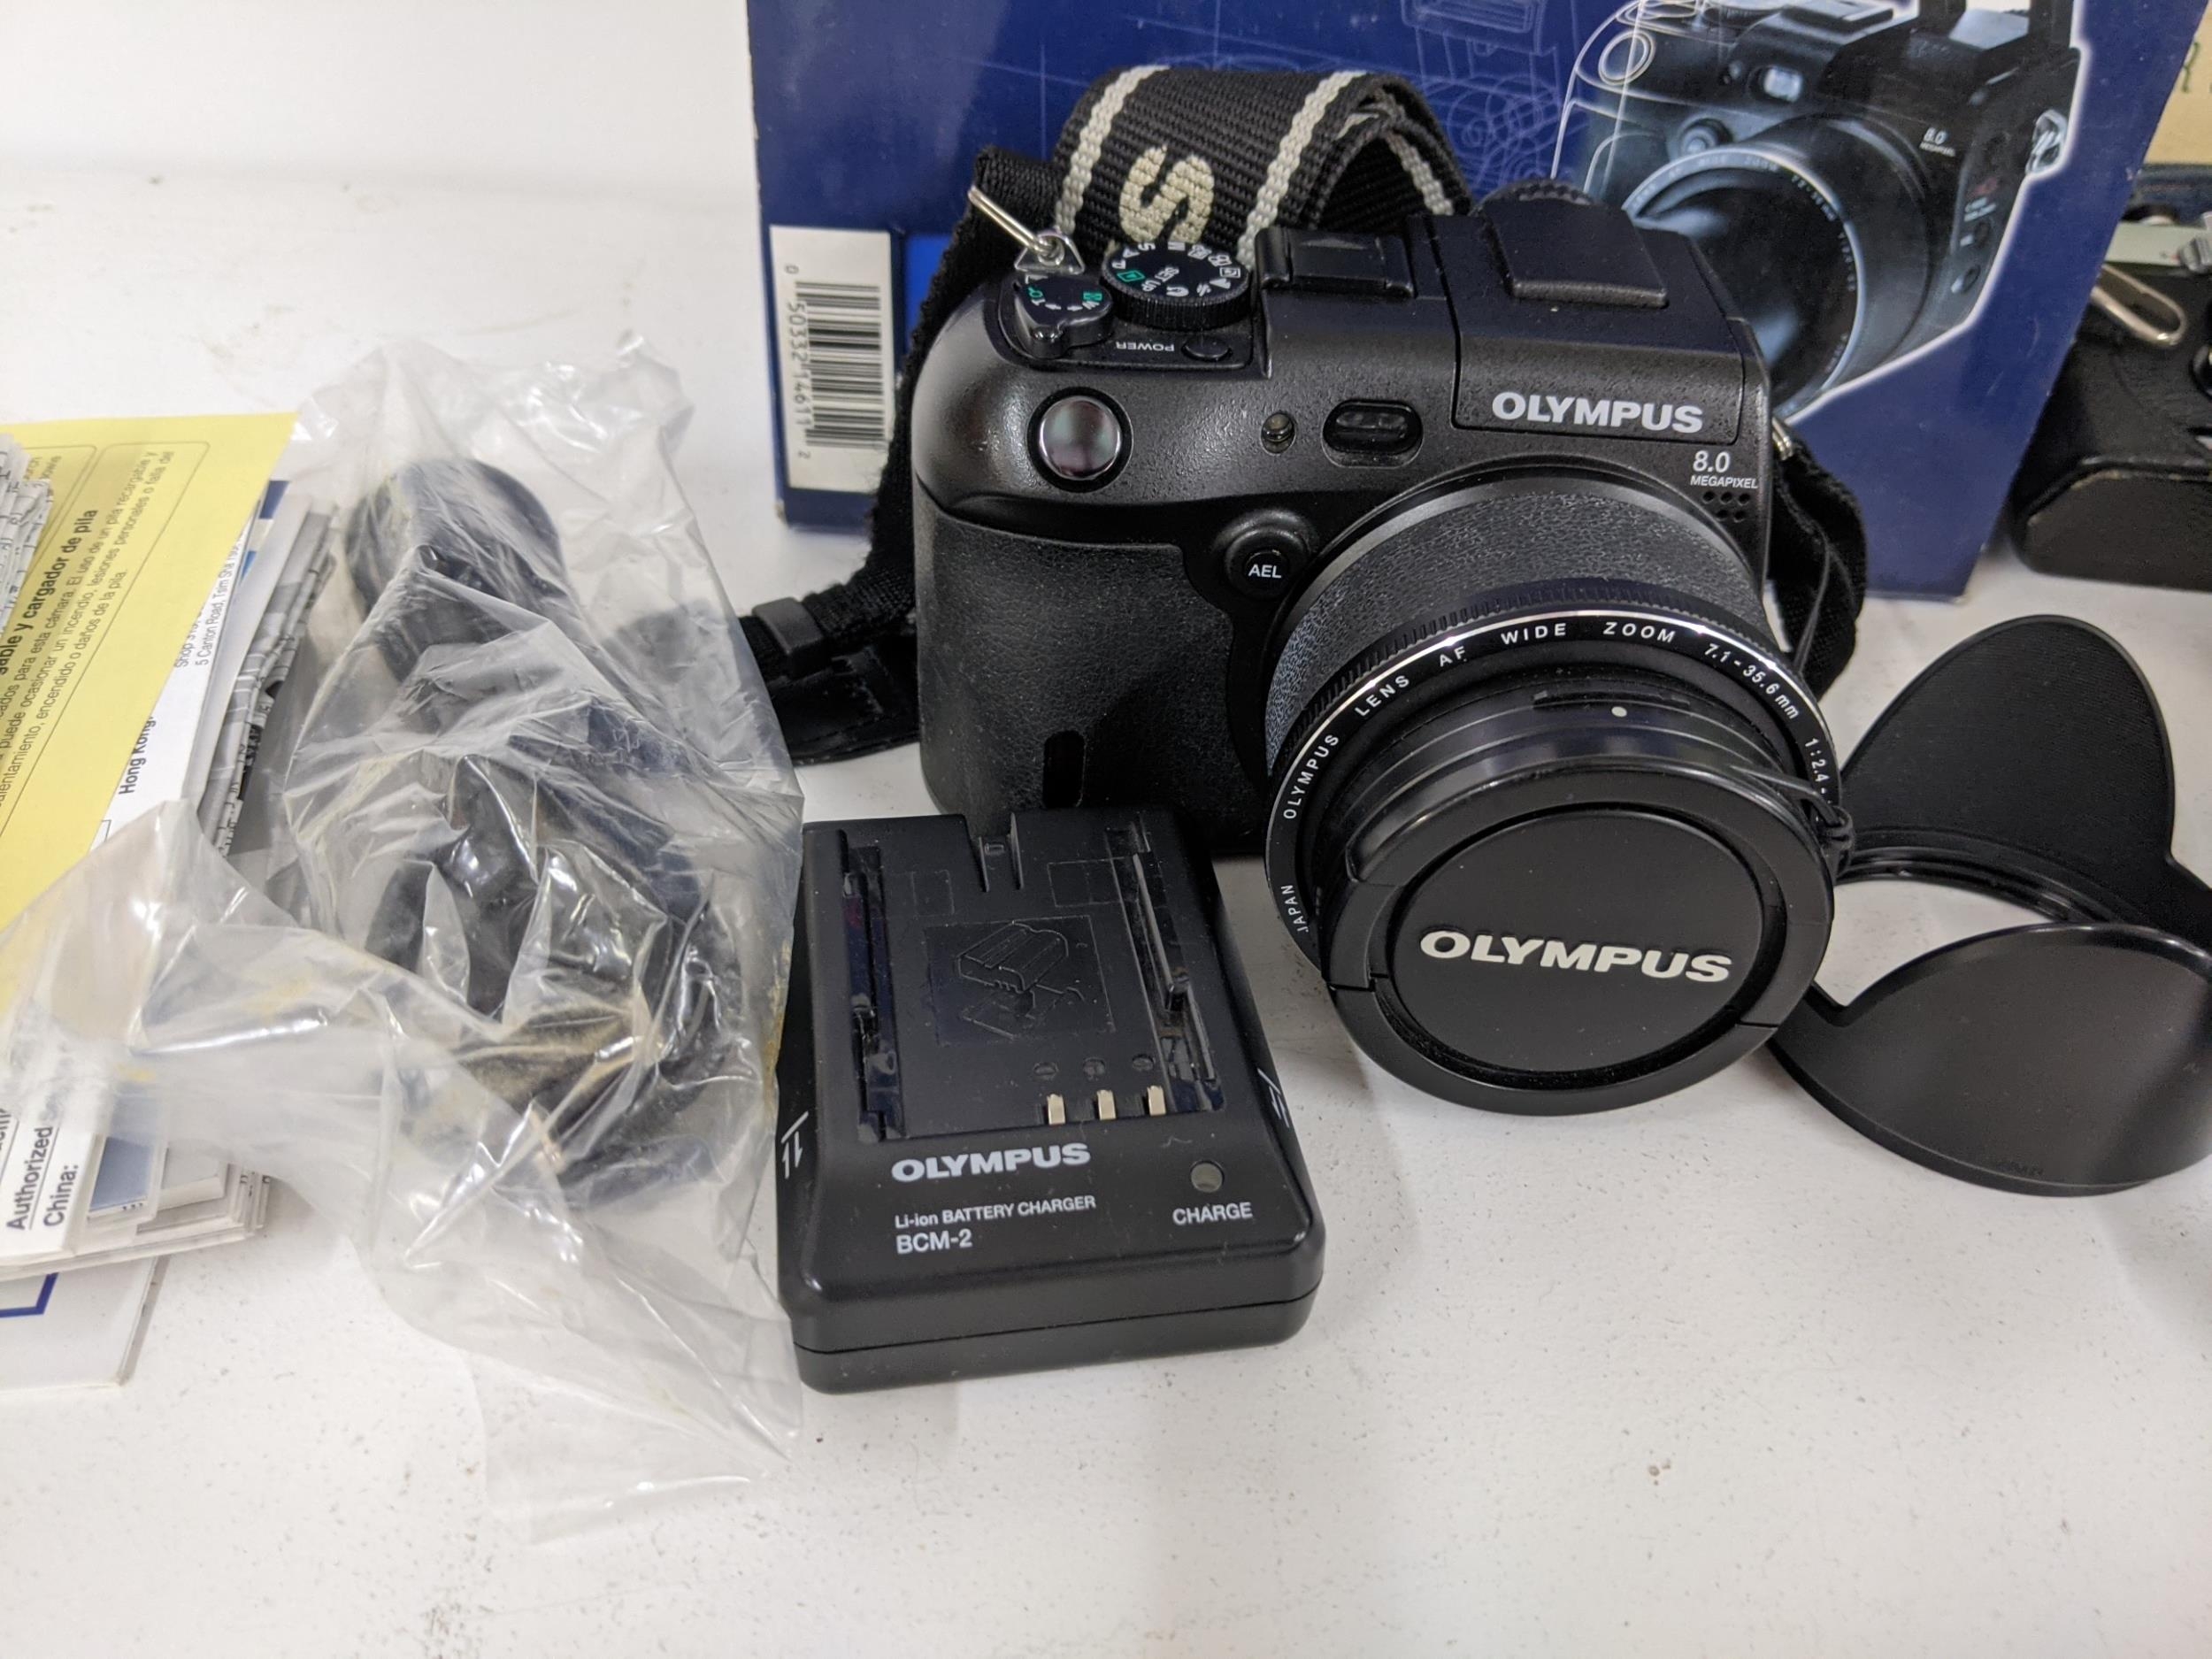 Olympus cameras, equipment and photography accessories to include two Olympus OM-2s, an Olympus OM- - Image 3 of 10